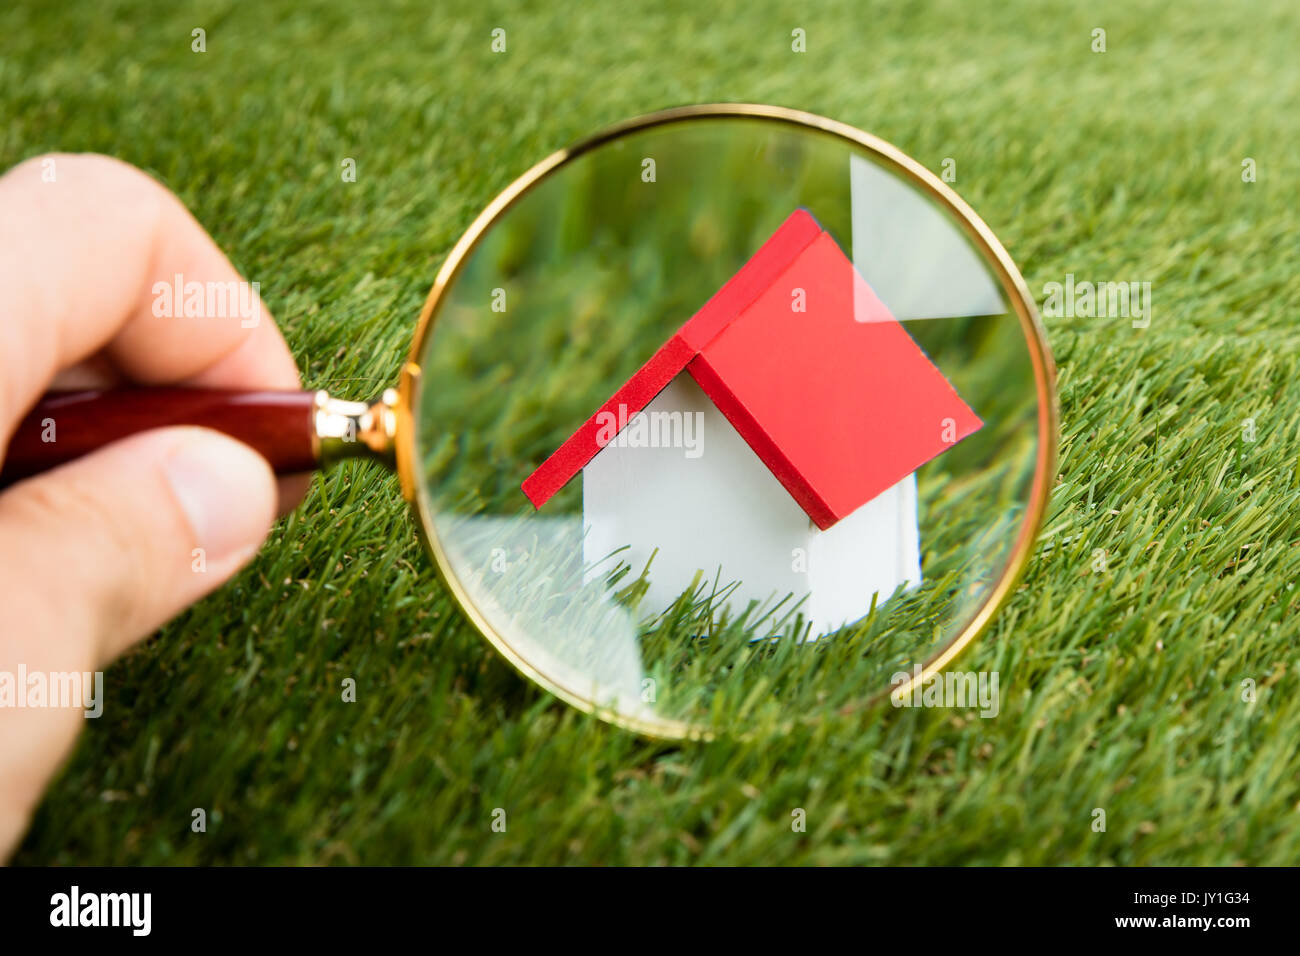 Person Hands With Magnifying Glass Inspecting A Model House On Grassy Field Stock Photo